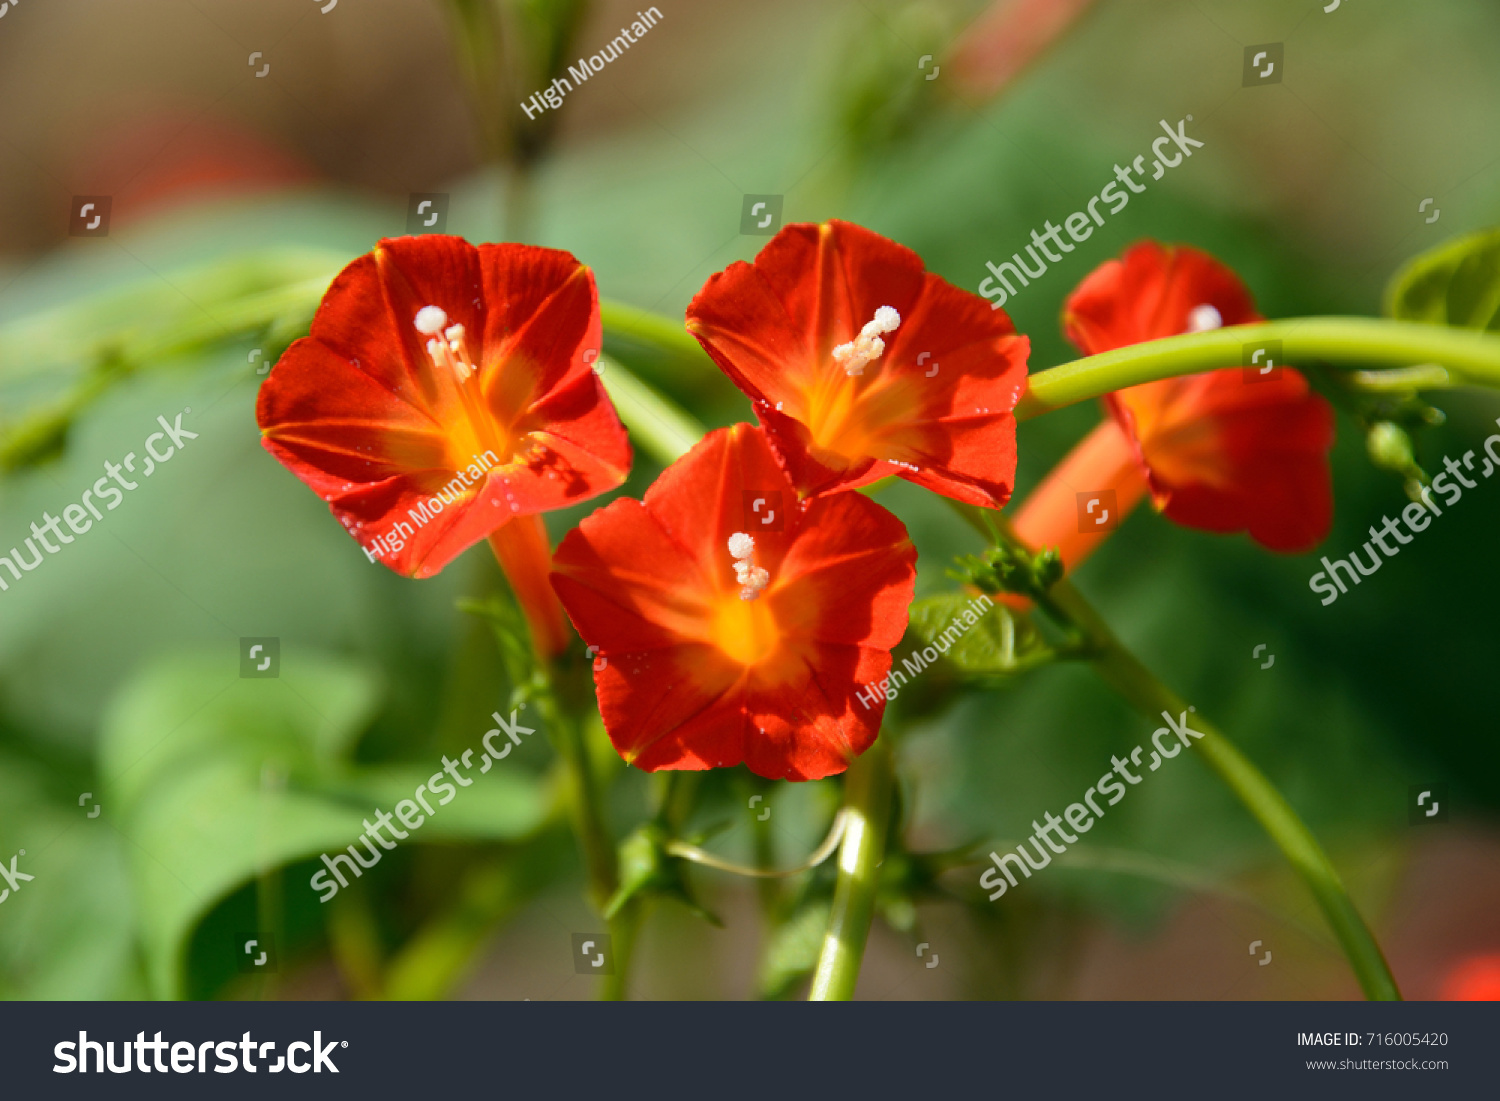 Pretty Flowers Red Morning Glory Stock Photo Edit Now 716005420